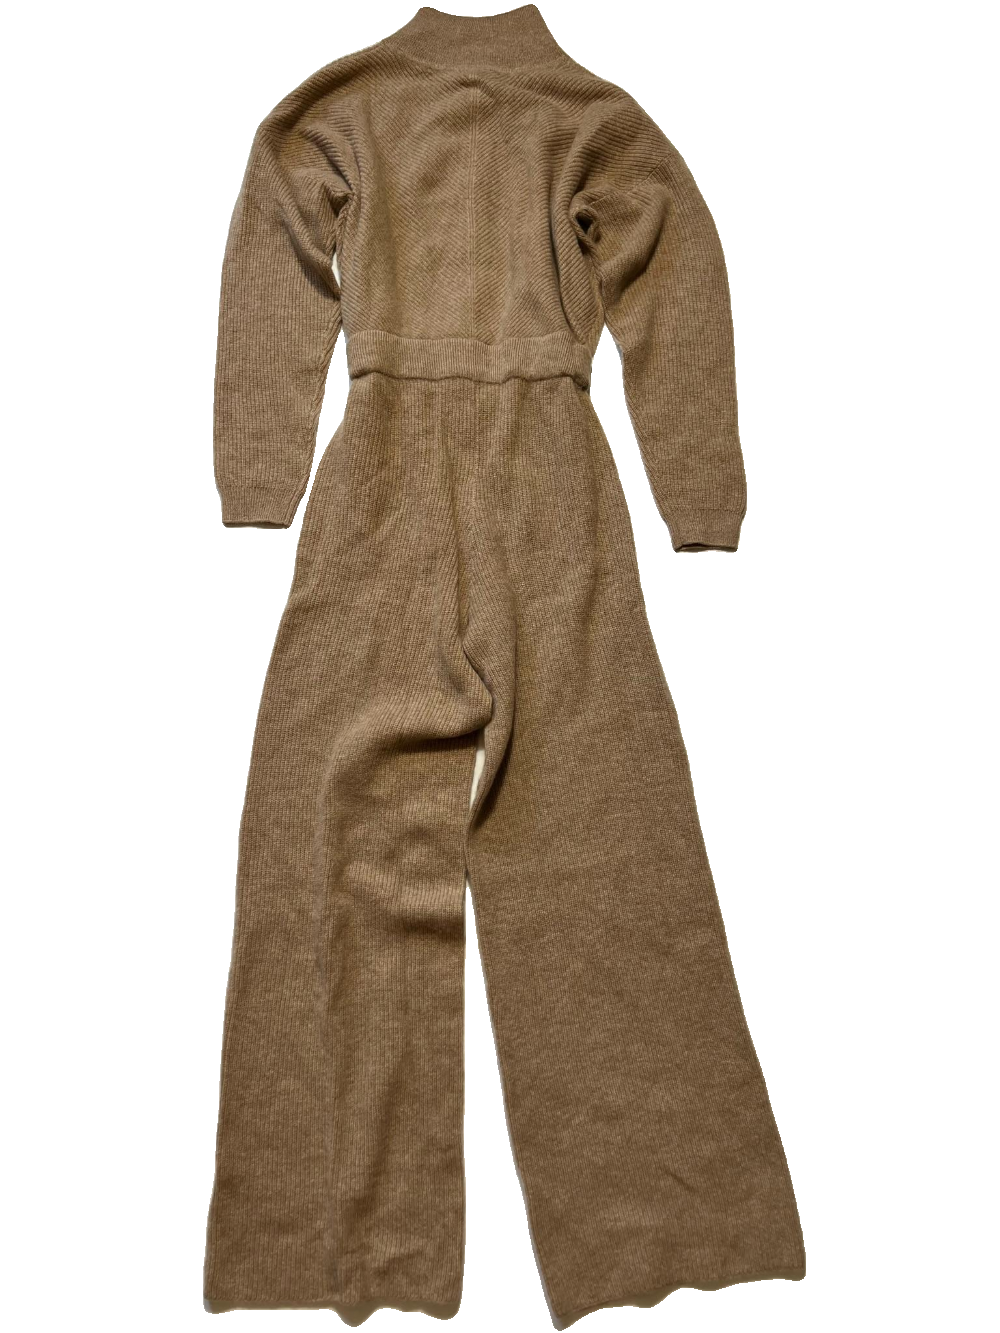 Filoro - Tan Cashmere Jumpsuit - NEW WITH TAGS